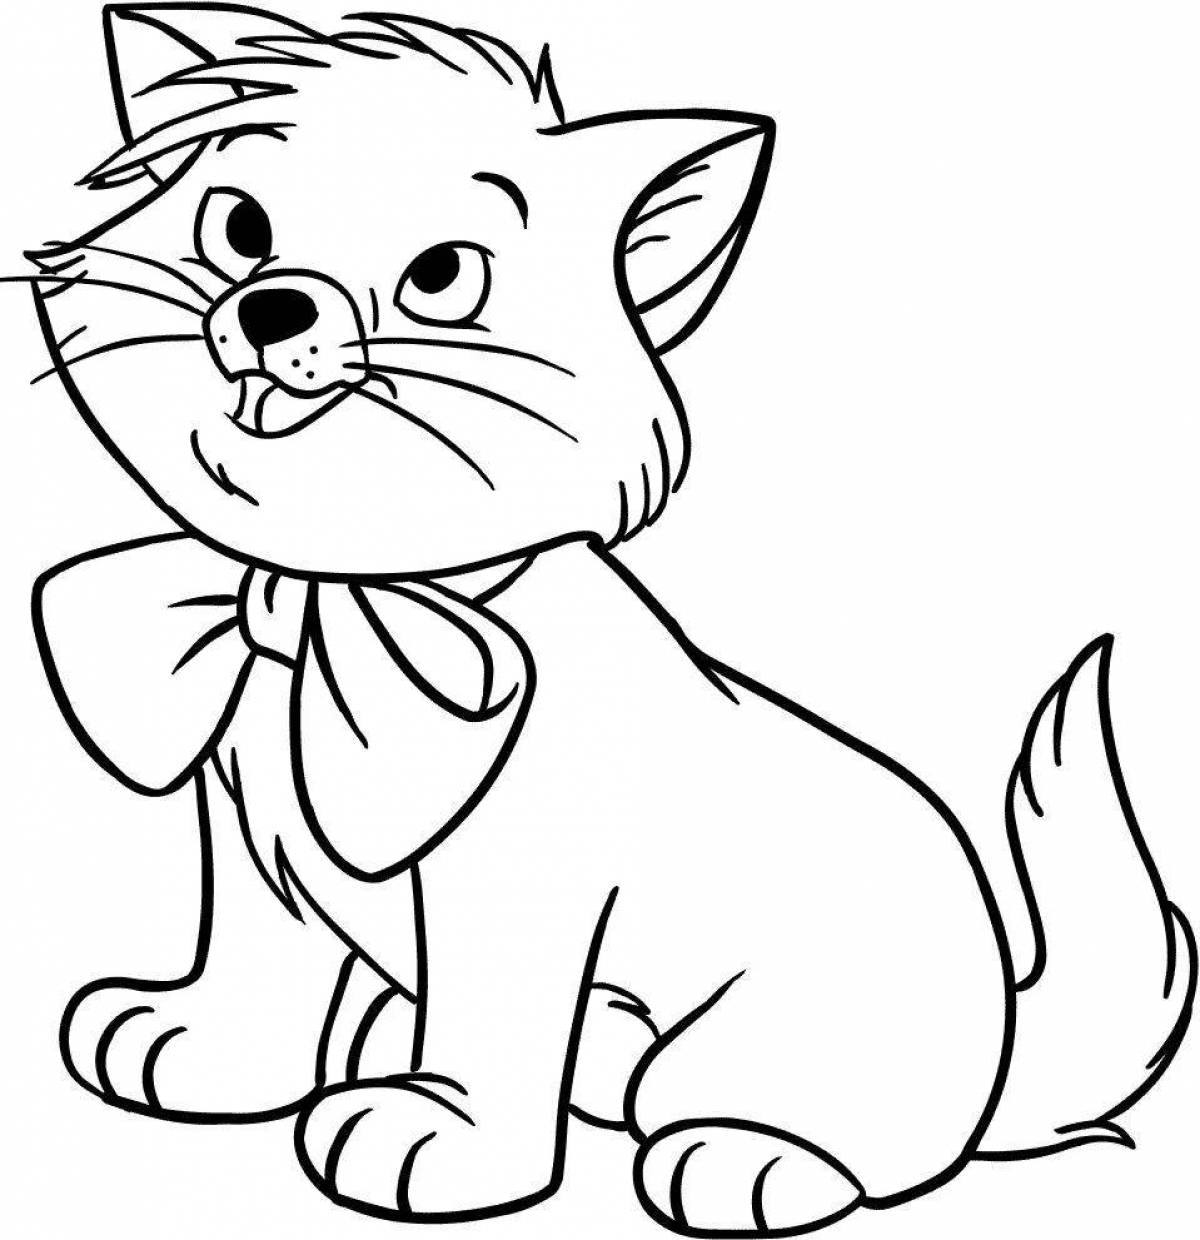 Kitty glowing coloring book for kids 5-6 years old